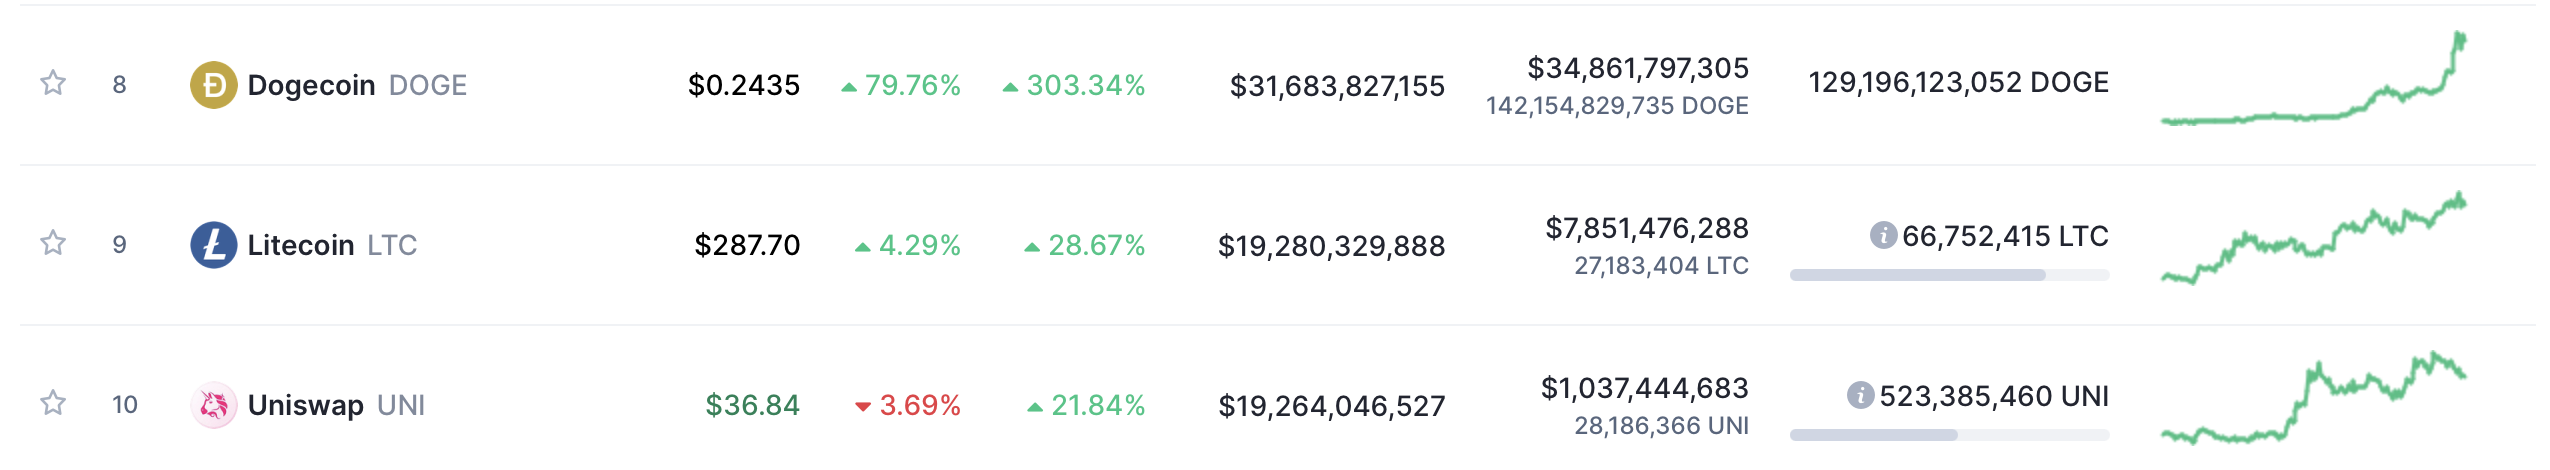 DOGE bypassed Uniswap and Litecoin in terms of capitalization